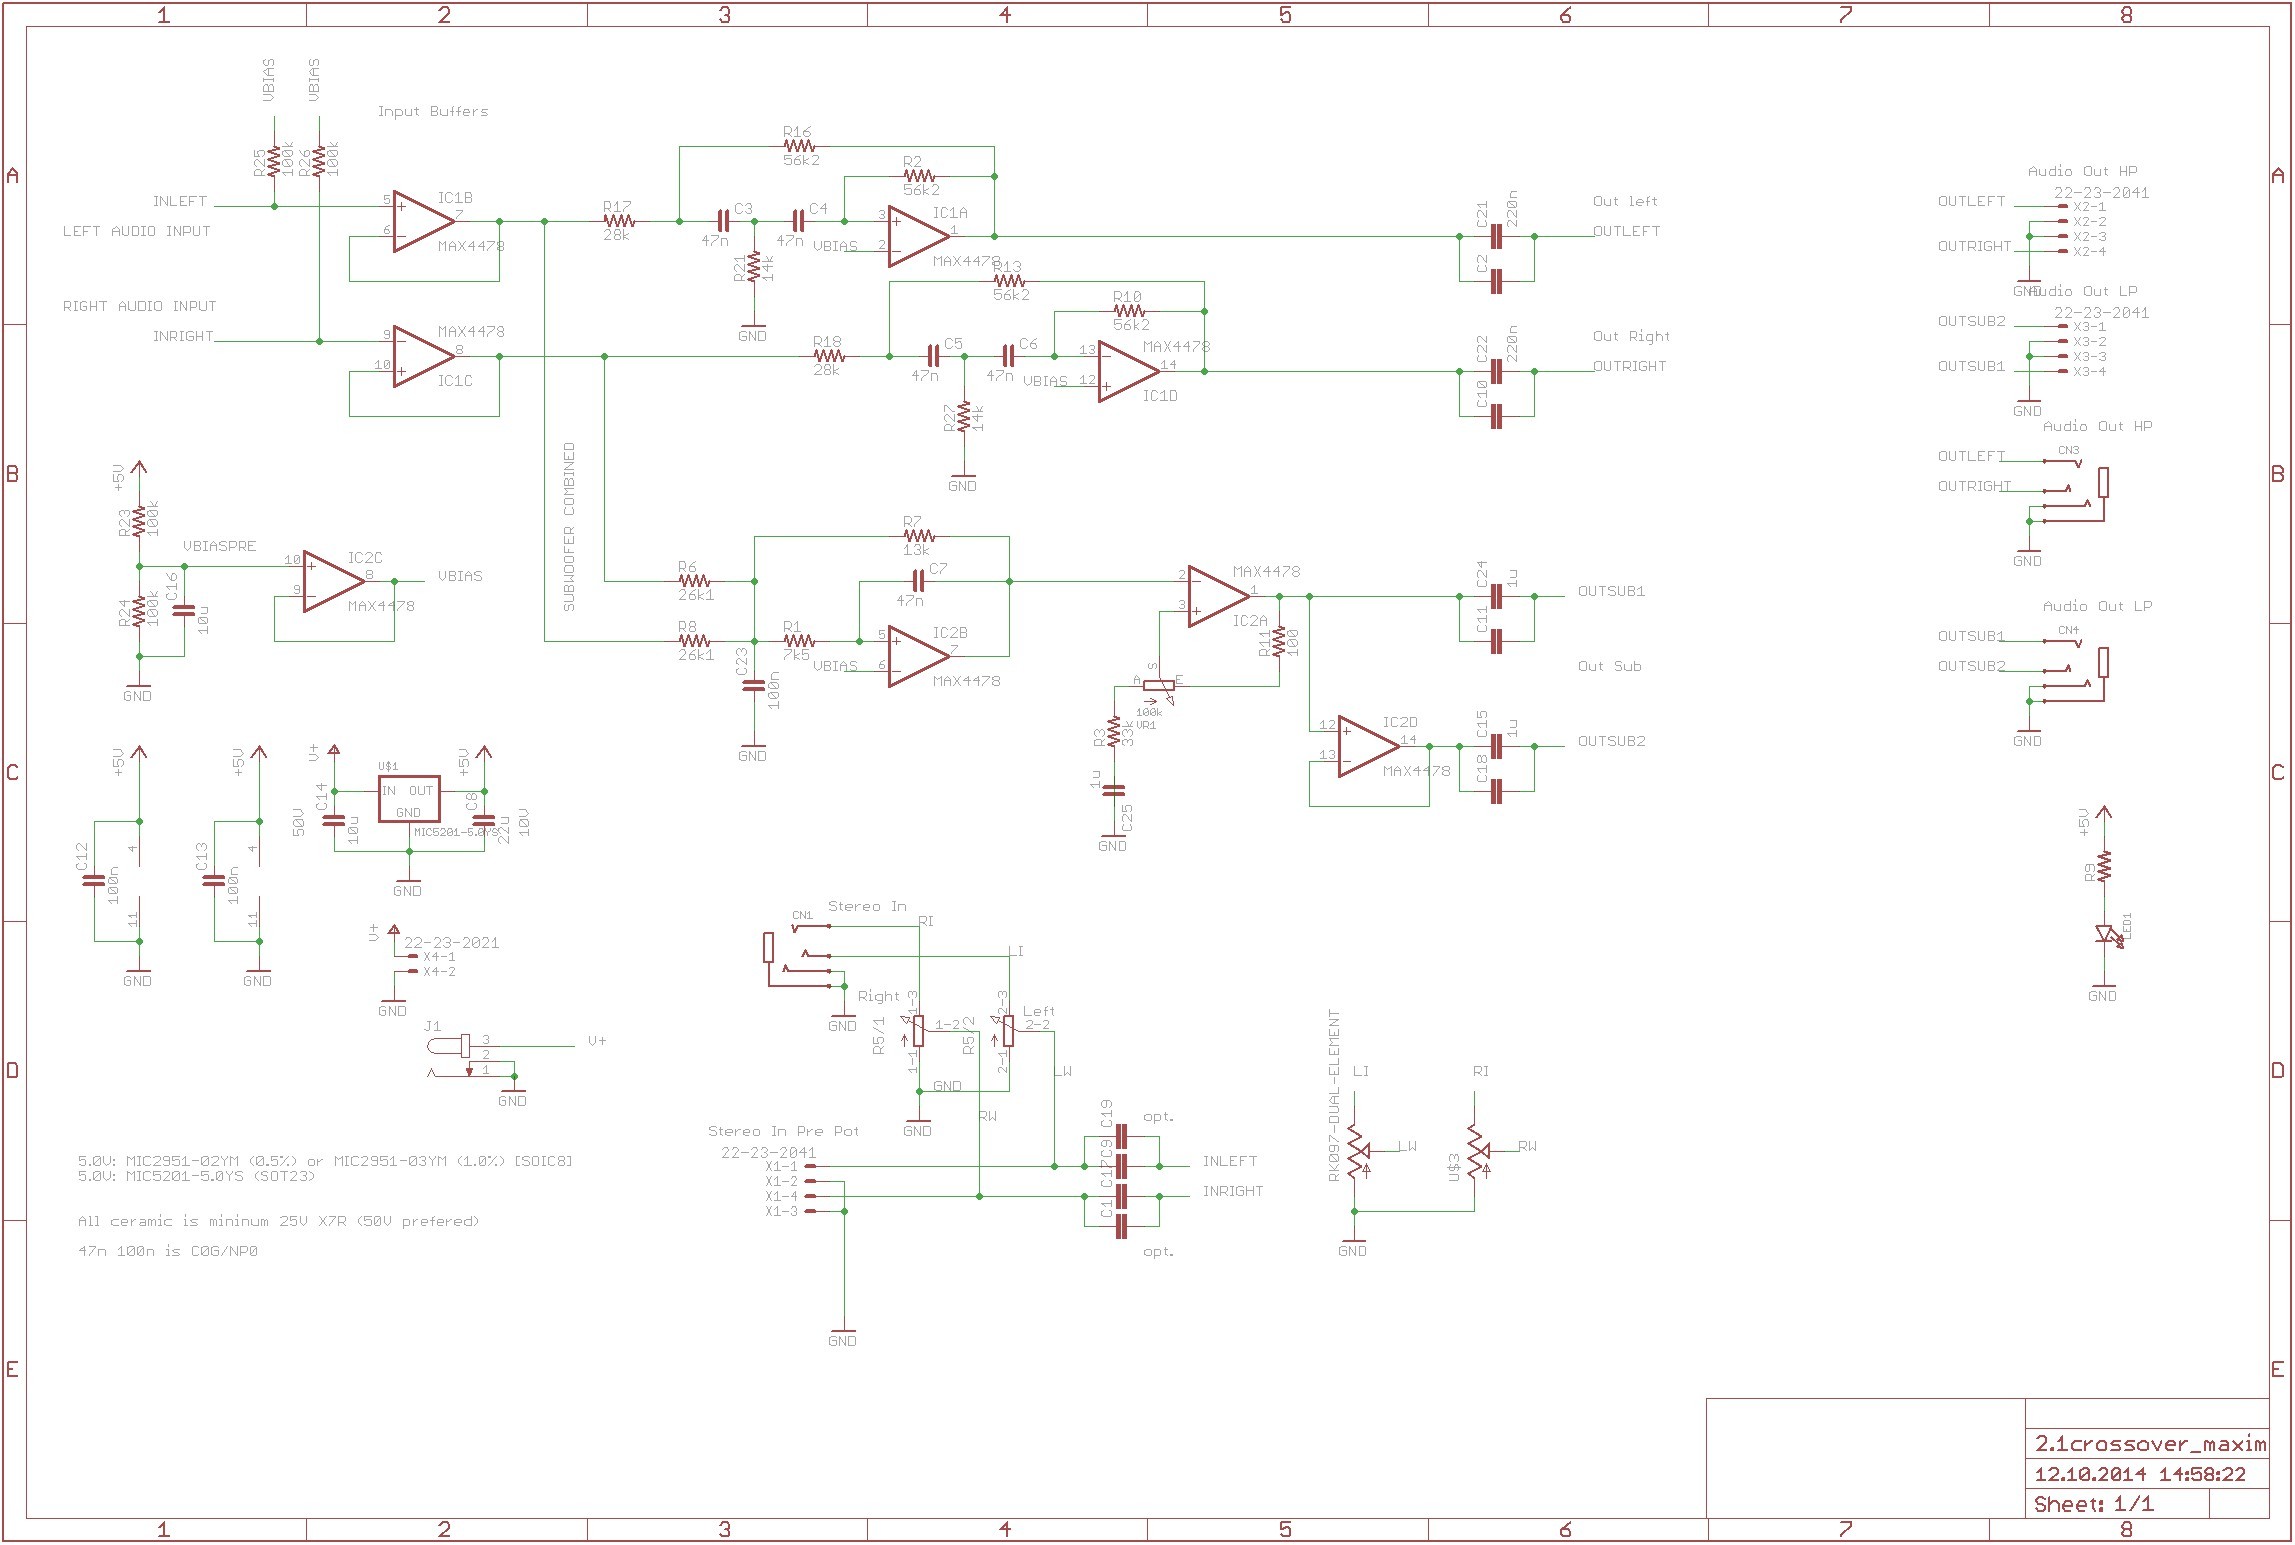 Aktive Crossoverfrequenzweiche Mit Max4478 360customs Crossover Schematic Rev 0d wiring lighting circuit scr circuit Diagram